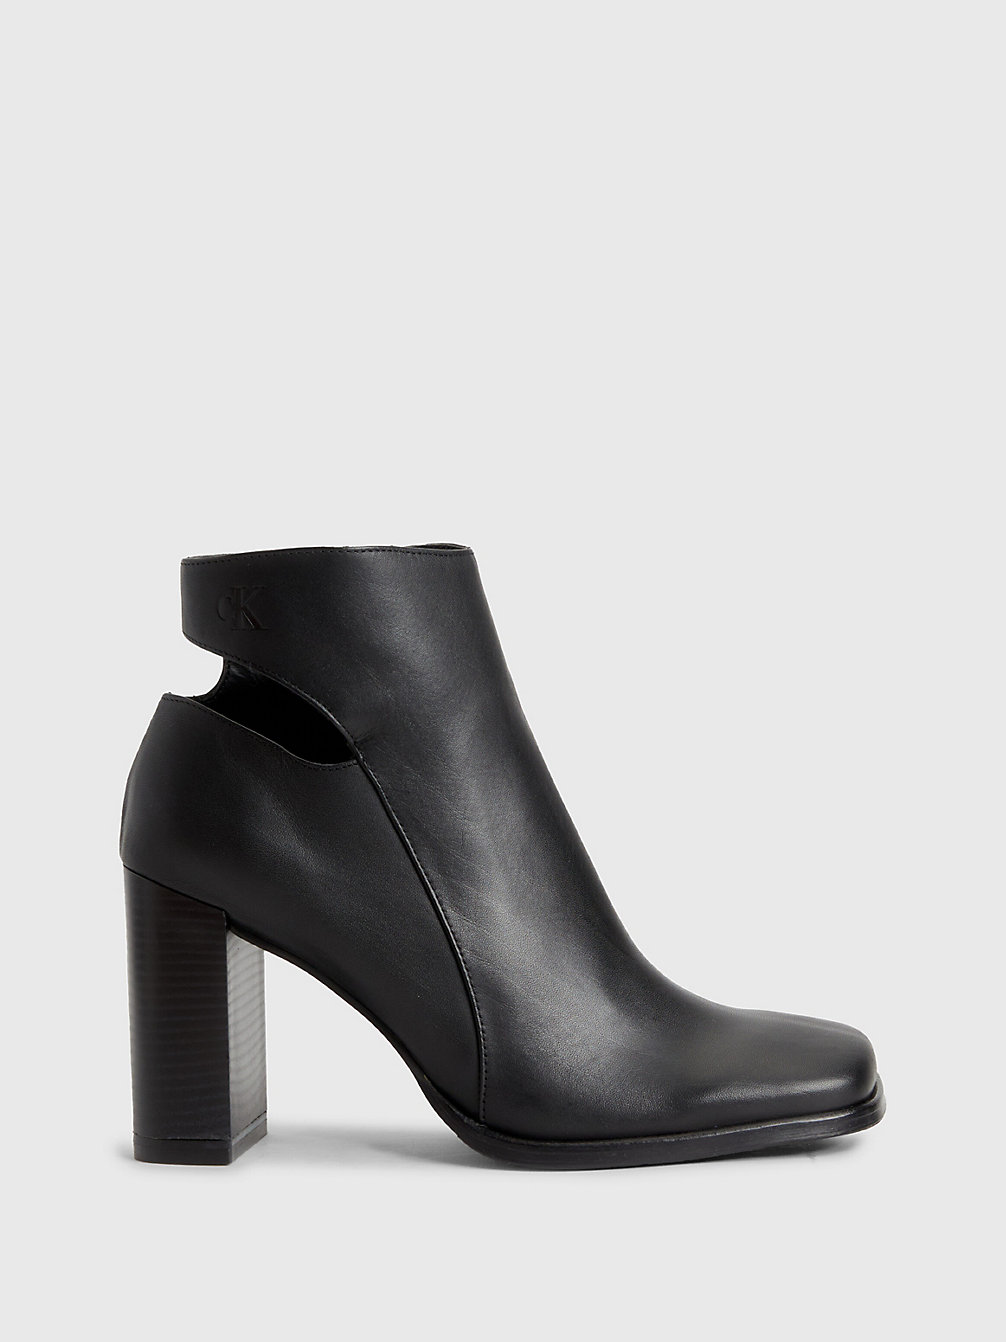 TRIPLE BLACK Leather Heeled Ankle Boots undefined women Calvin Klein